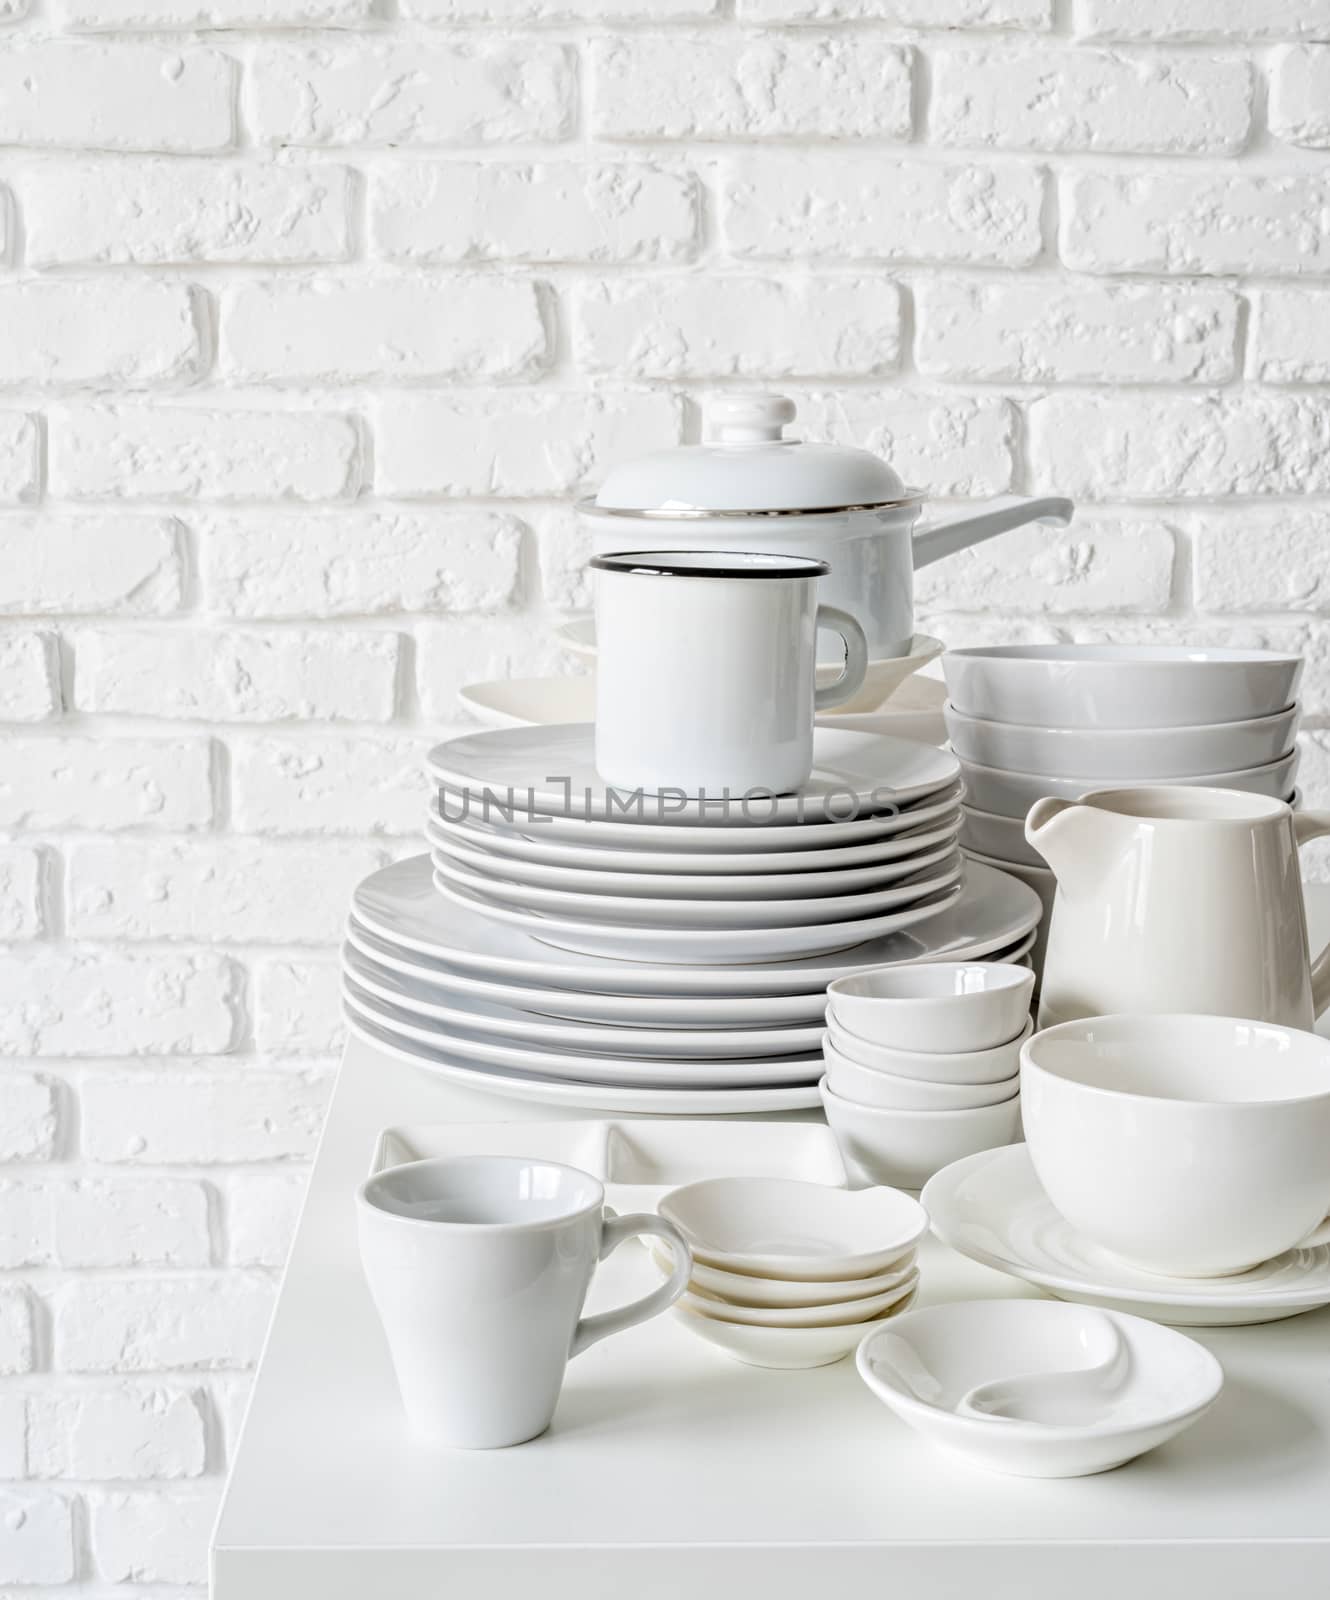 piles of white ceramic dishes and tableware on the table on white brick wall background by Desperada